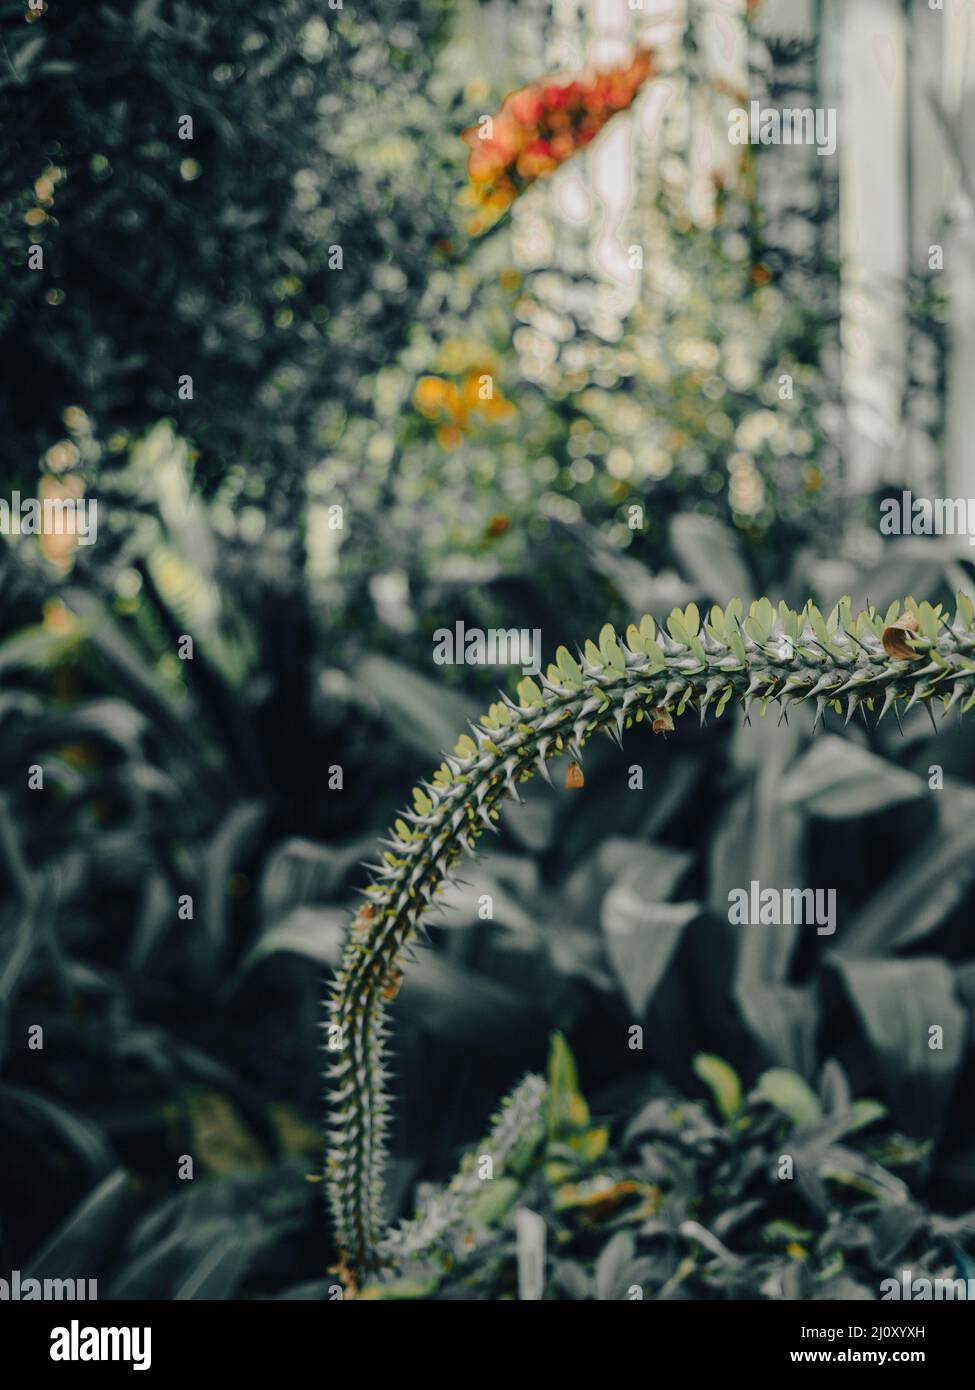 Tropical plant leaves and lush green fern, palm and jungle foliage. Taken in the botanical gardens of Geneva, Switzerland. Stock Photo